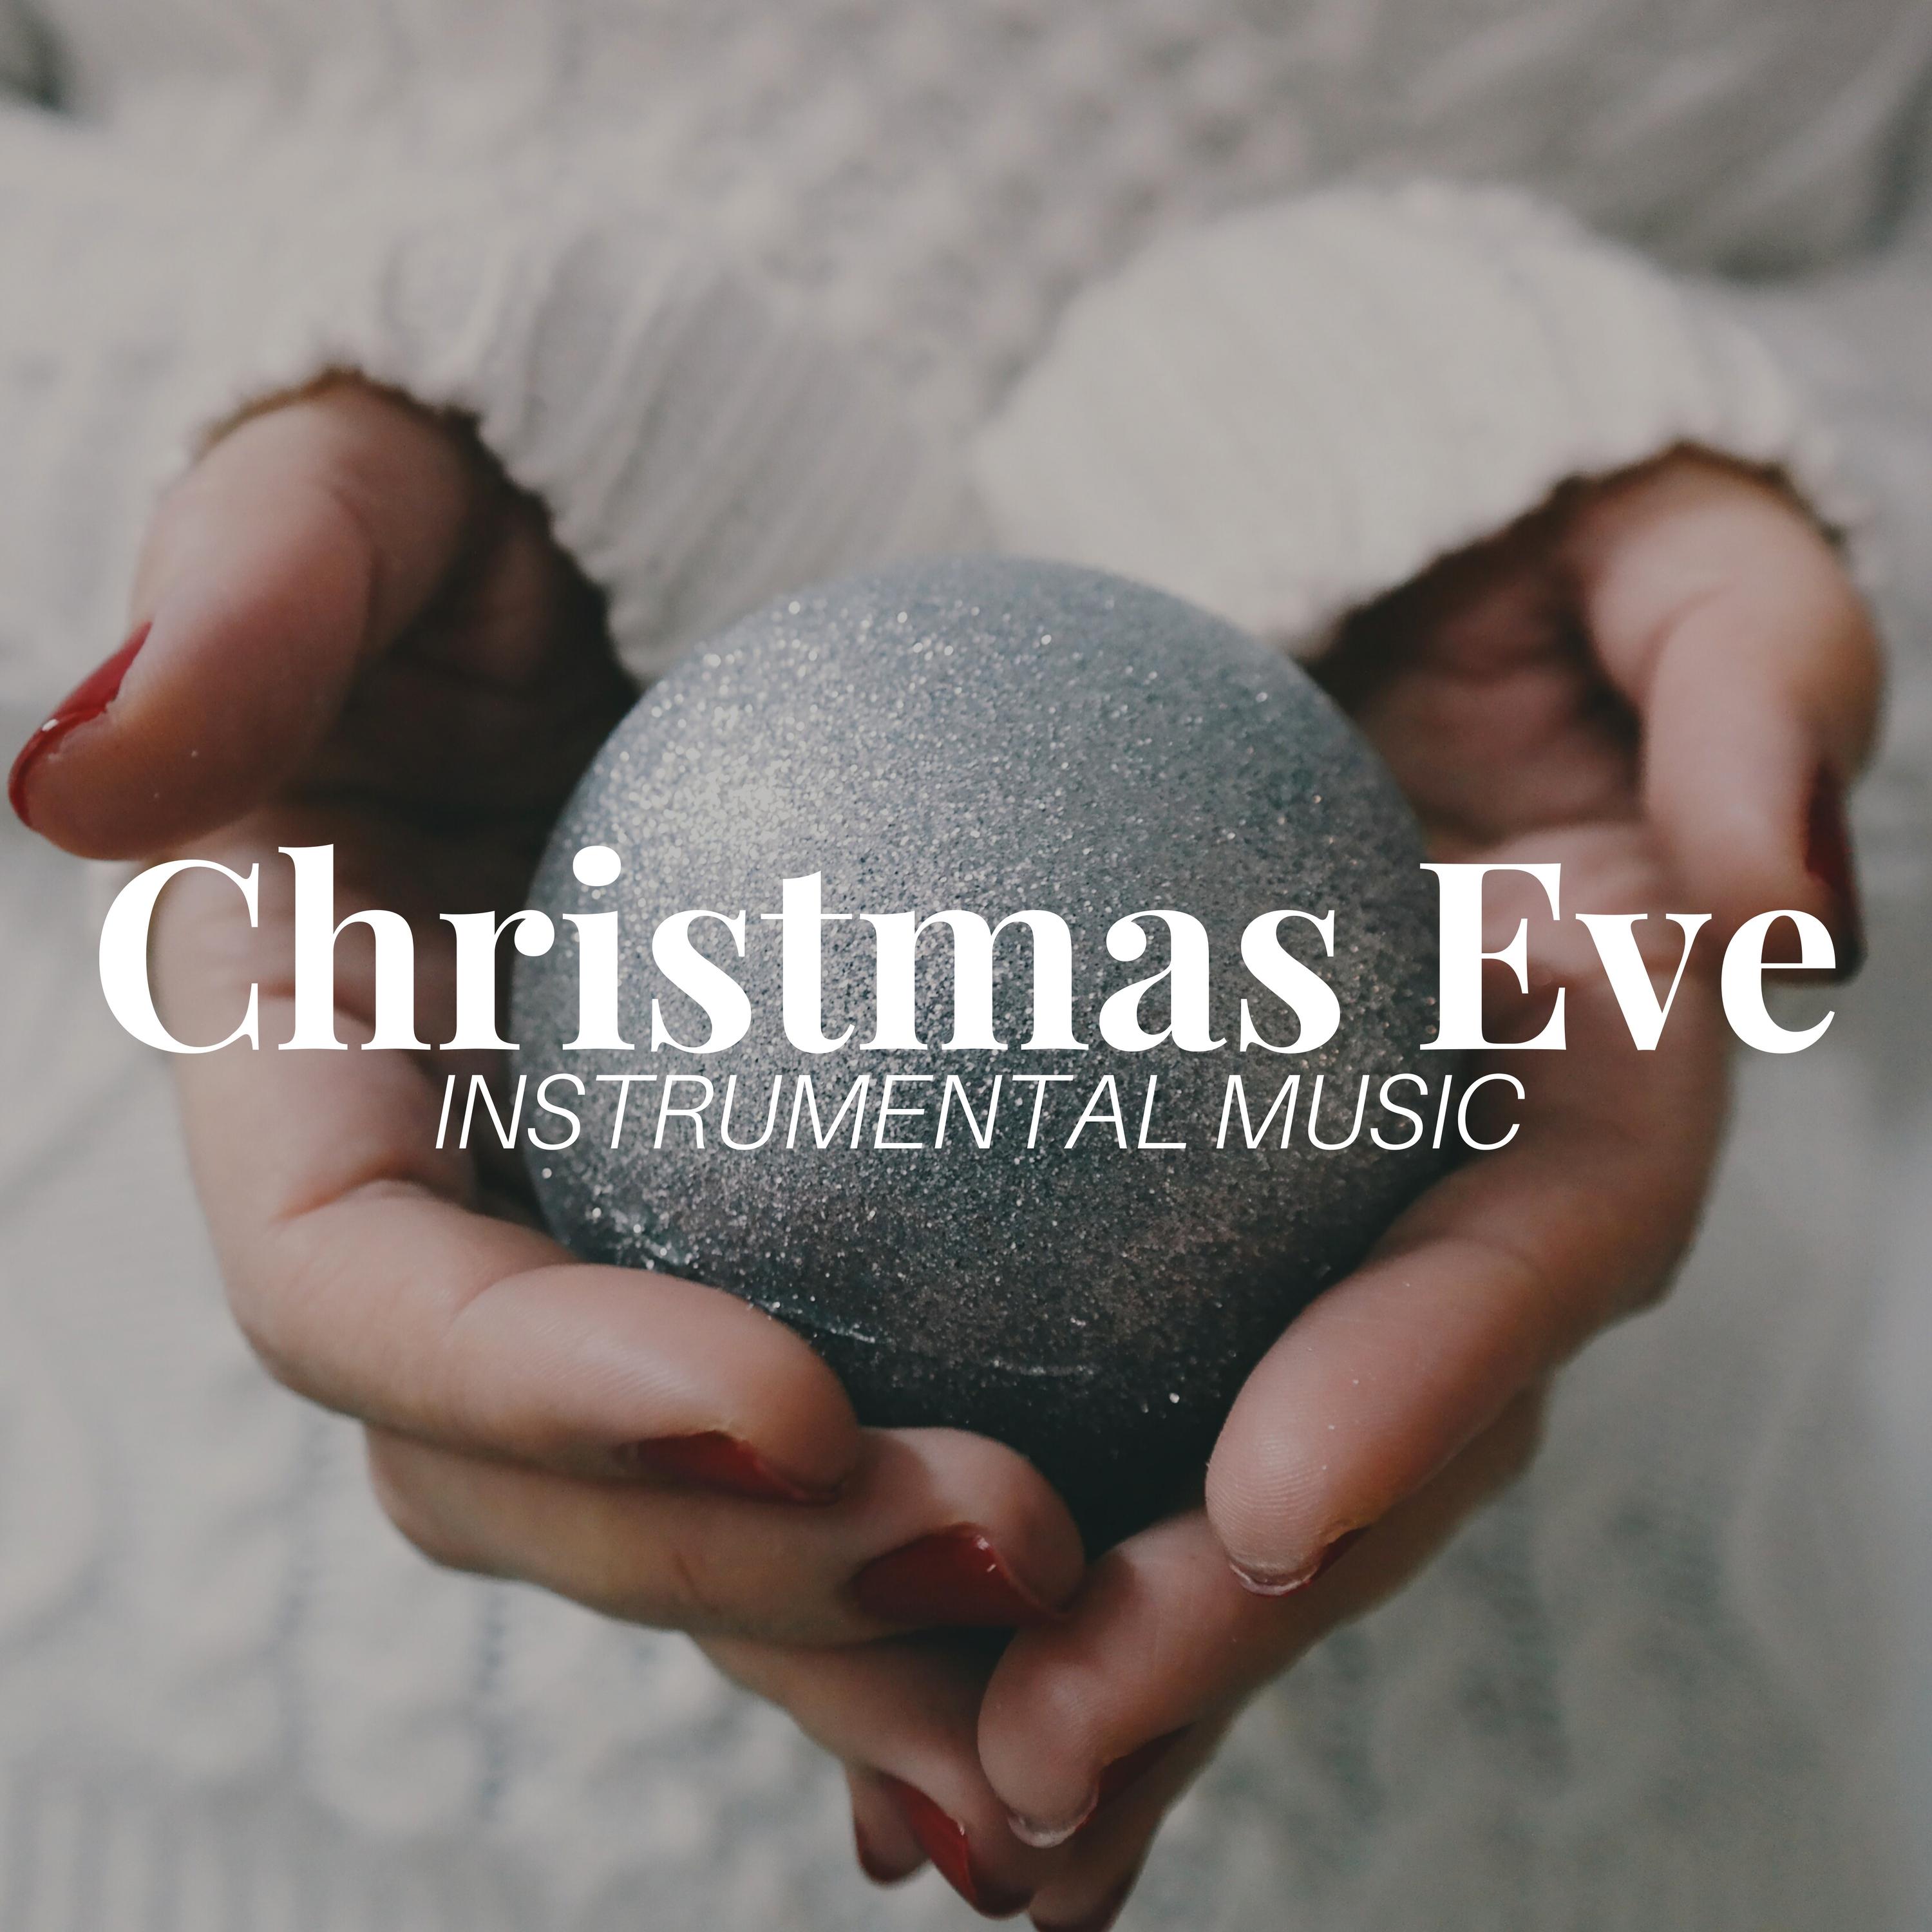 Christmas Eve: Instrumental Music and Christmas Songs for Slow Time Christmas Break Holidays